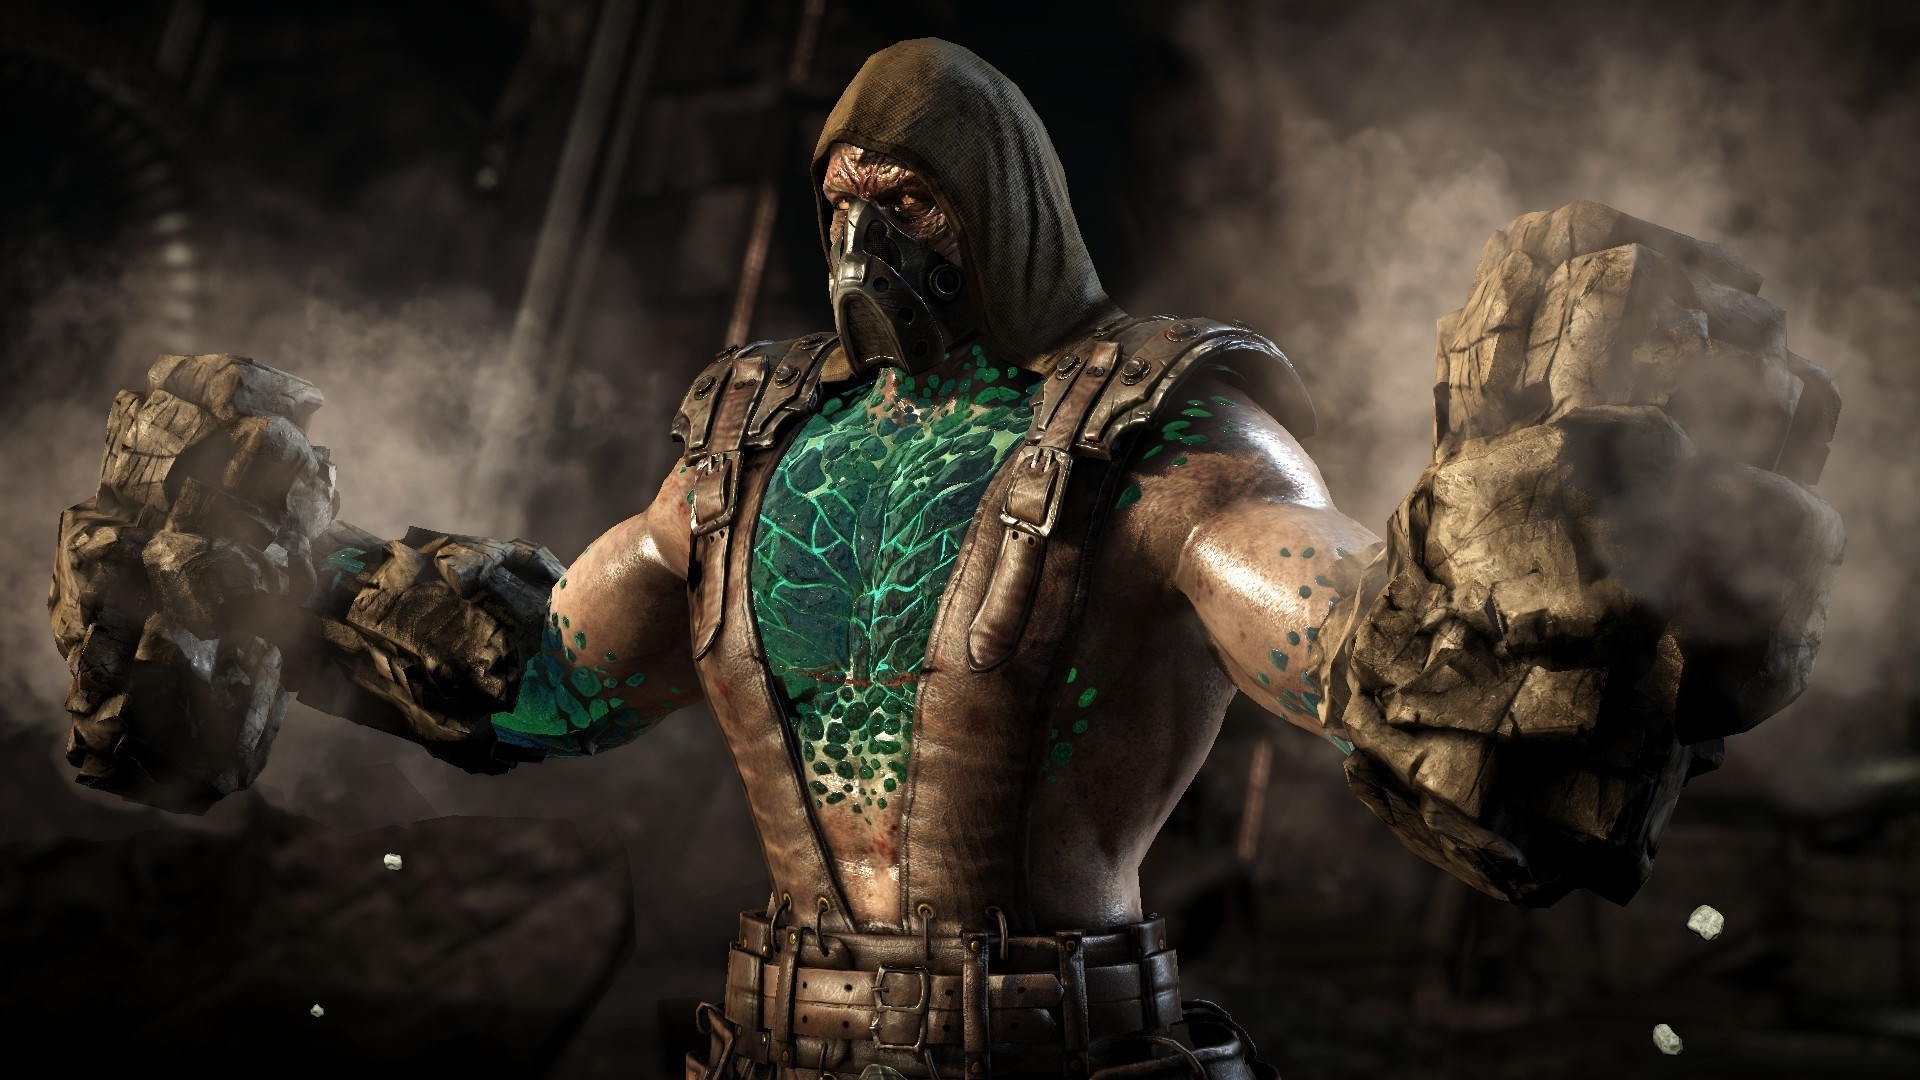 1920x1080 [] Tremor From Mortal Kombat X Need #iPhone #6S #Plus #Wallpaper/  #Background for #IPhone6SPlus? Follow iPhone 6S Plus 3Wallpapers/ #Backg…